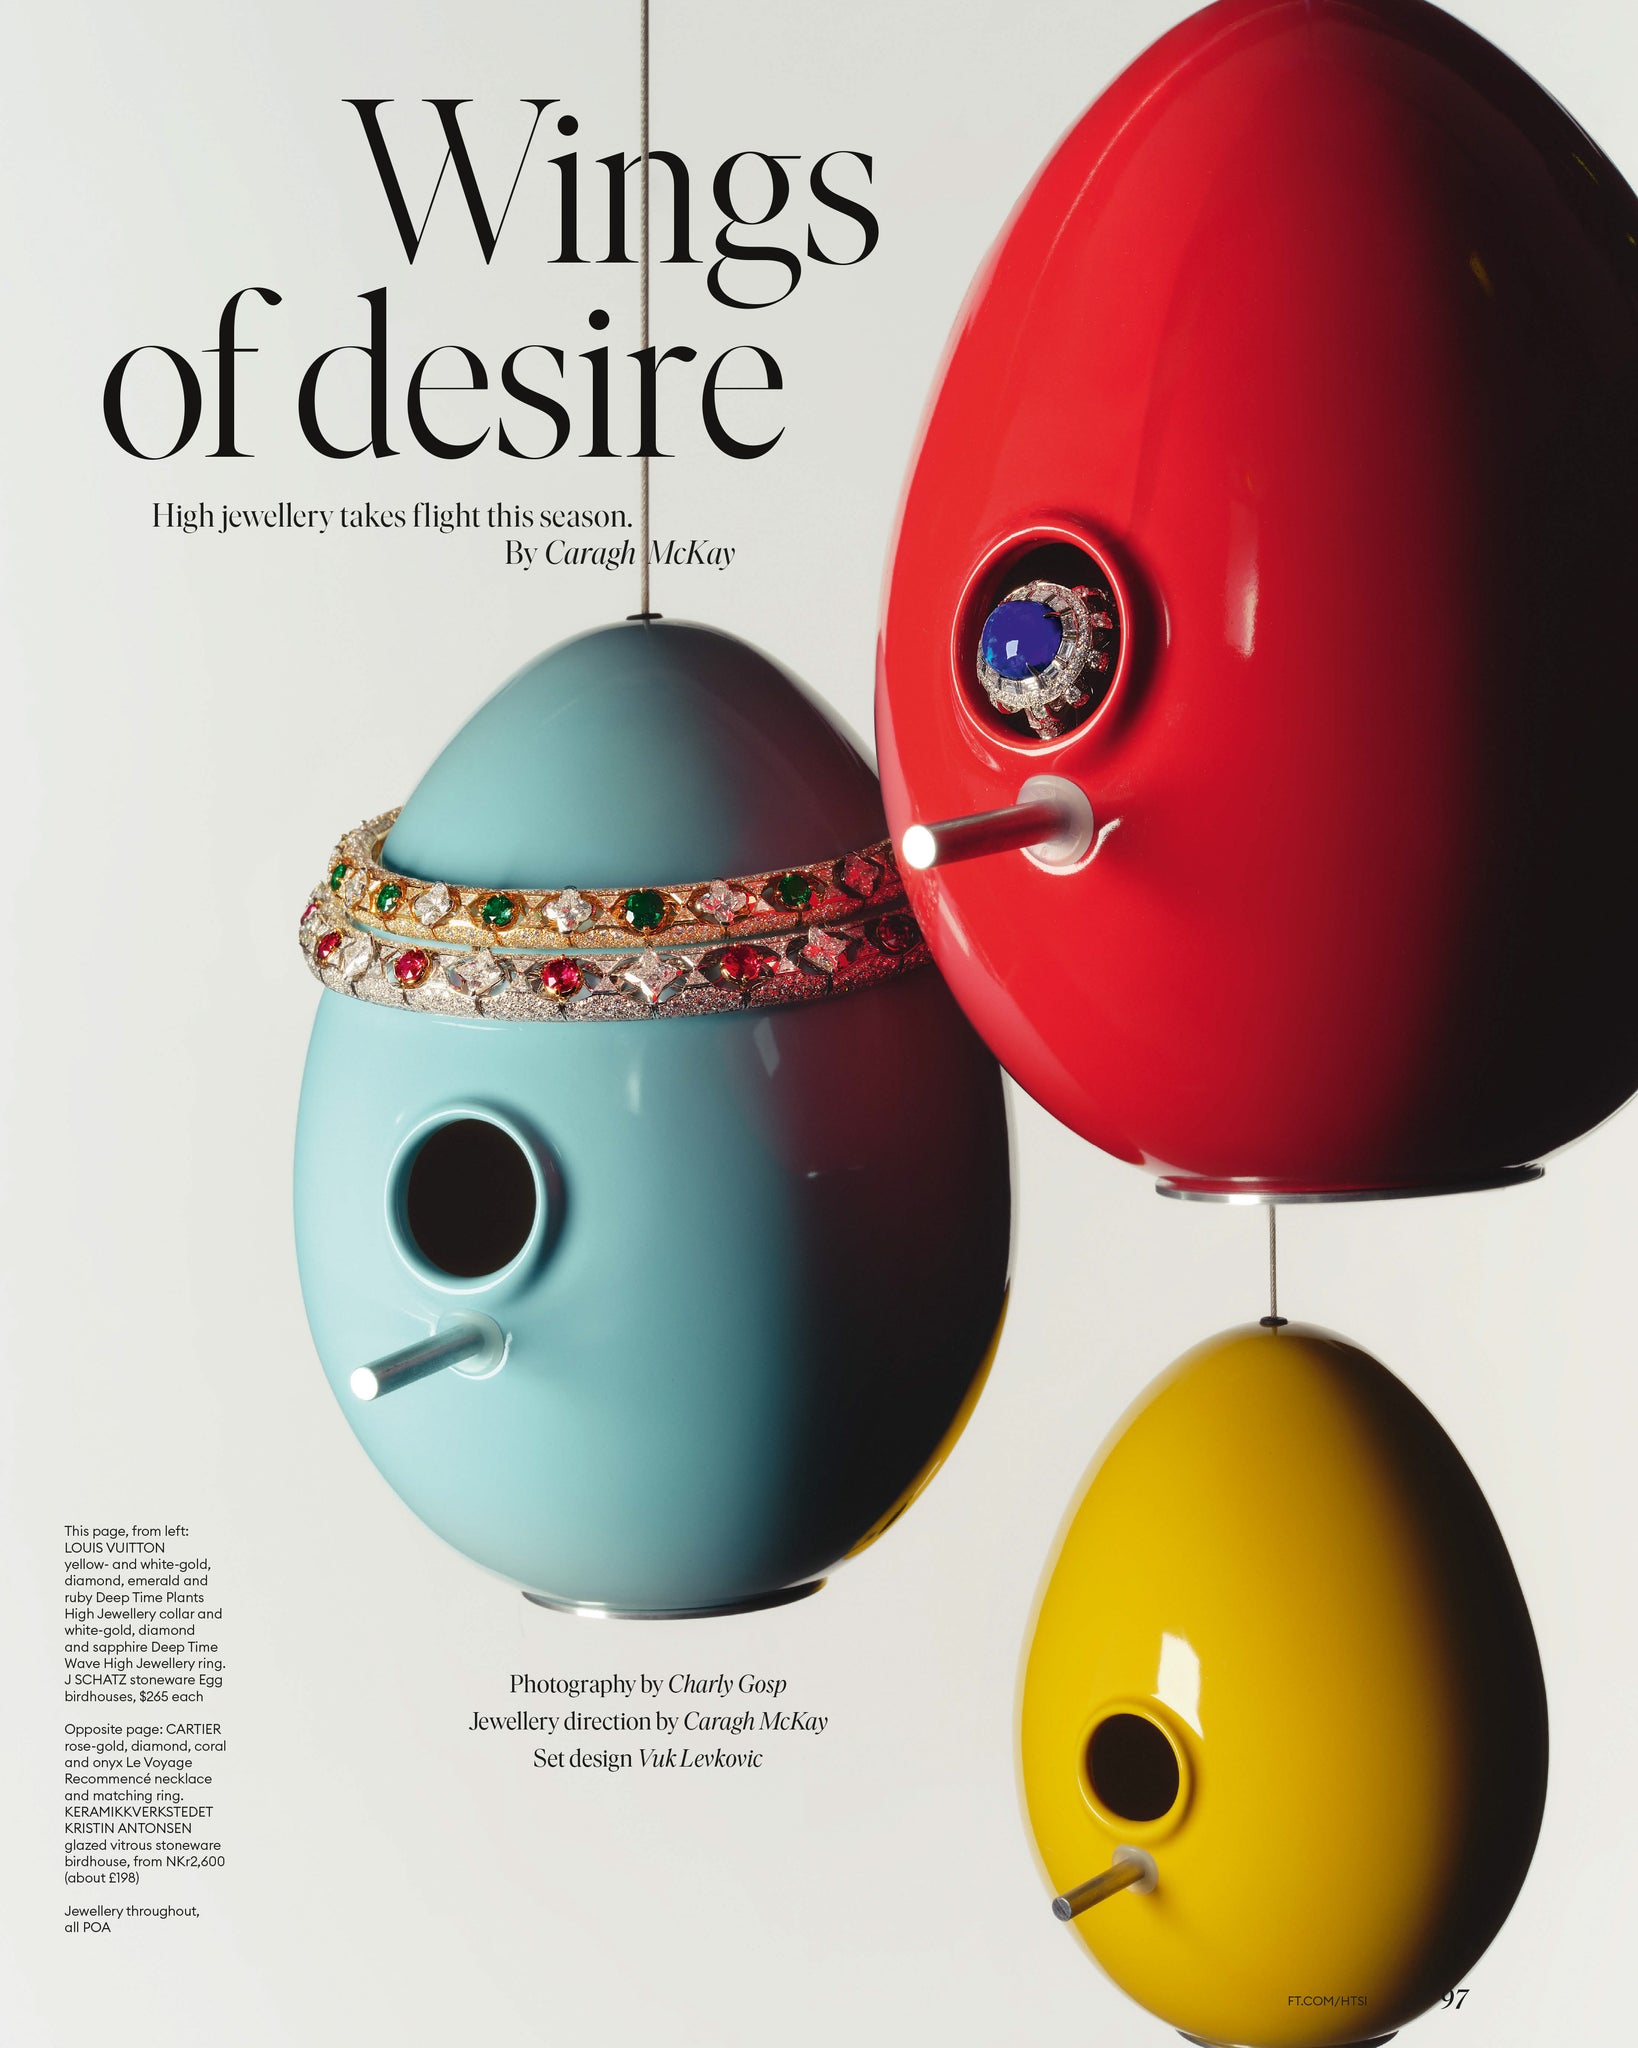 On the Light Aqua, Red, and Yellow Egg Bird House: Louis Vuitton yellow- and white-gold, diamond, emerald and ruby Deep Time Plants High Jewellery collar and white-gold, diamond and sapphire Deep Time Wave High Jewellery ring.